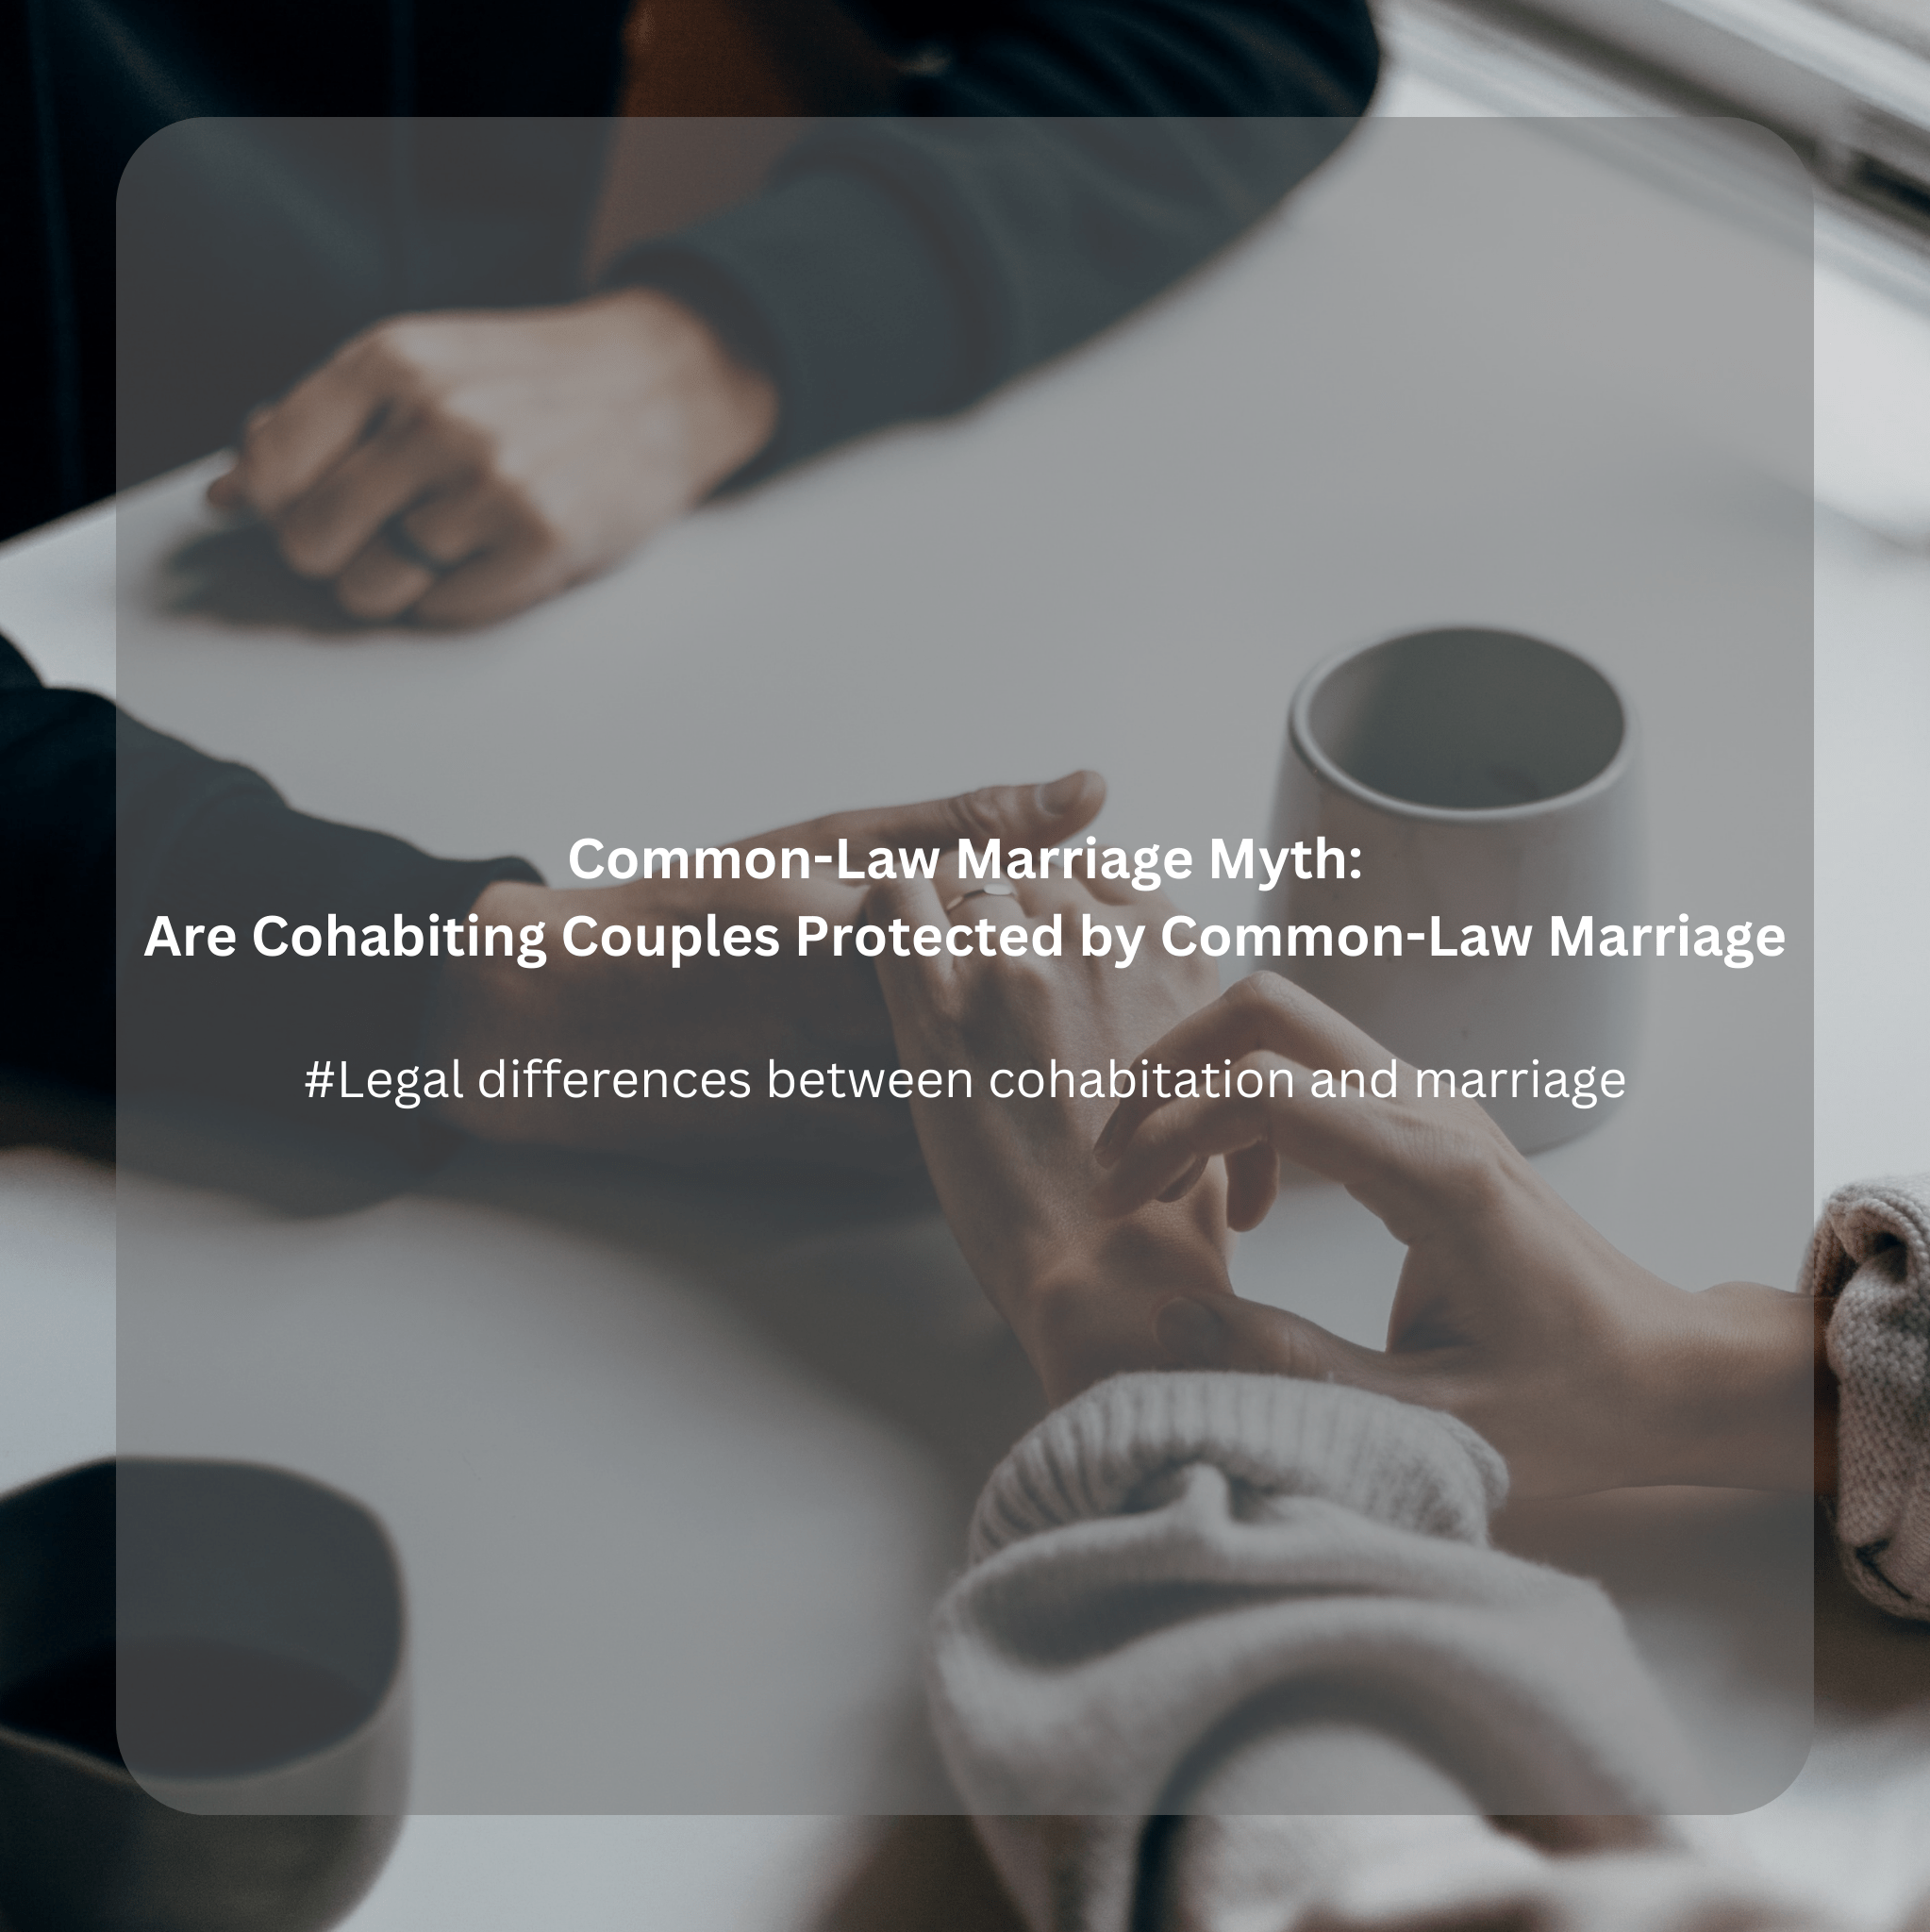 Common-Law Marriage Myth: Are Cohabiting Couples Protected by Common-Law Marriage?